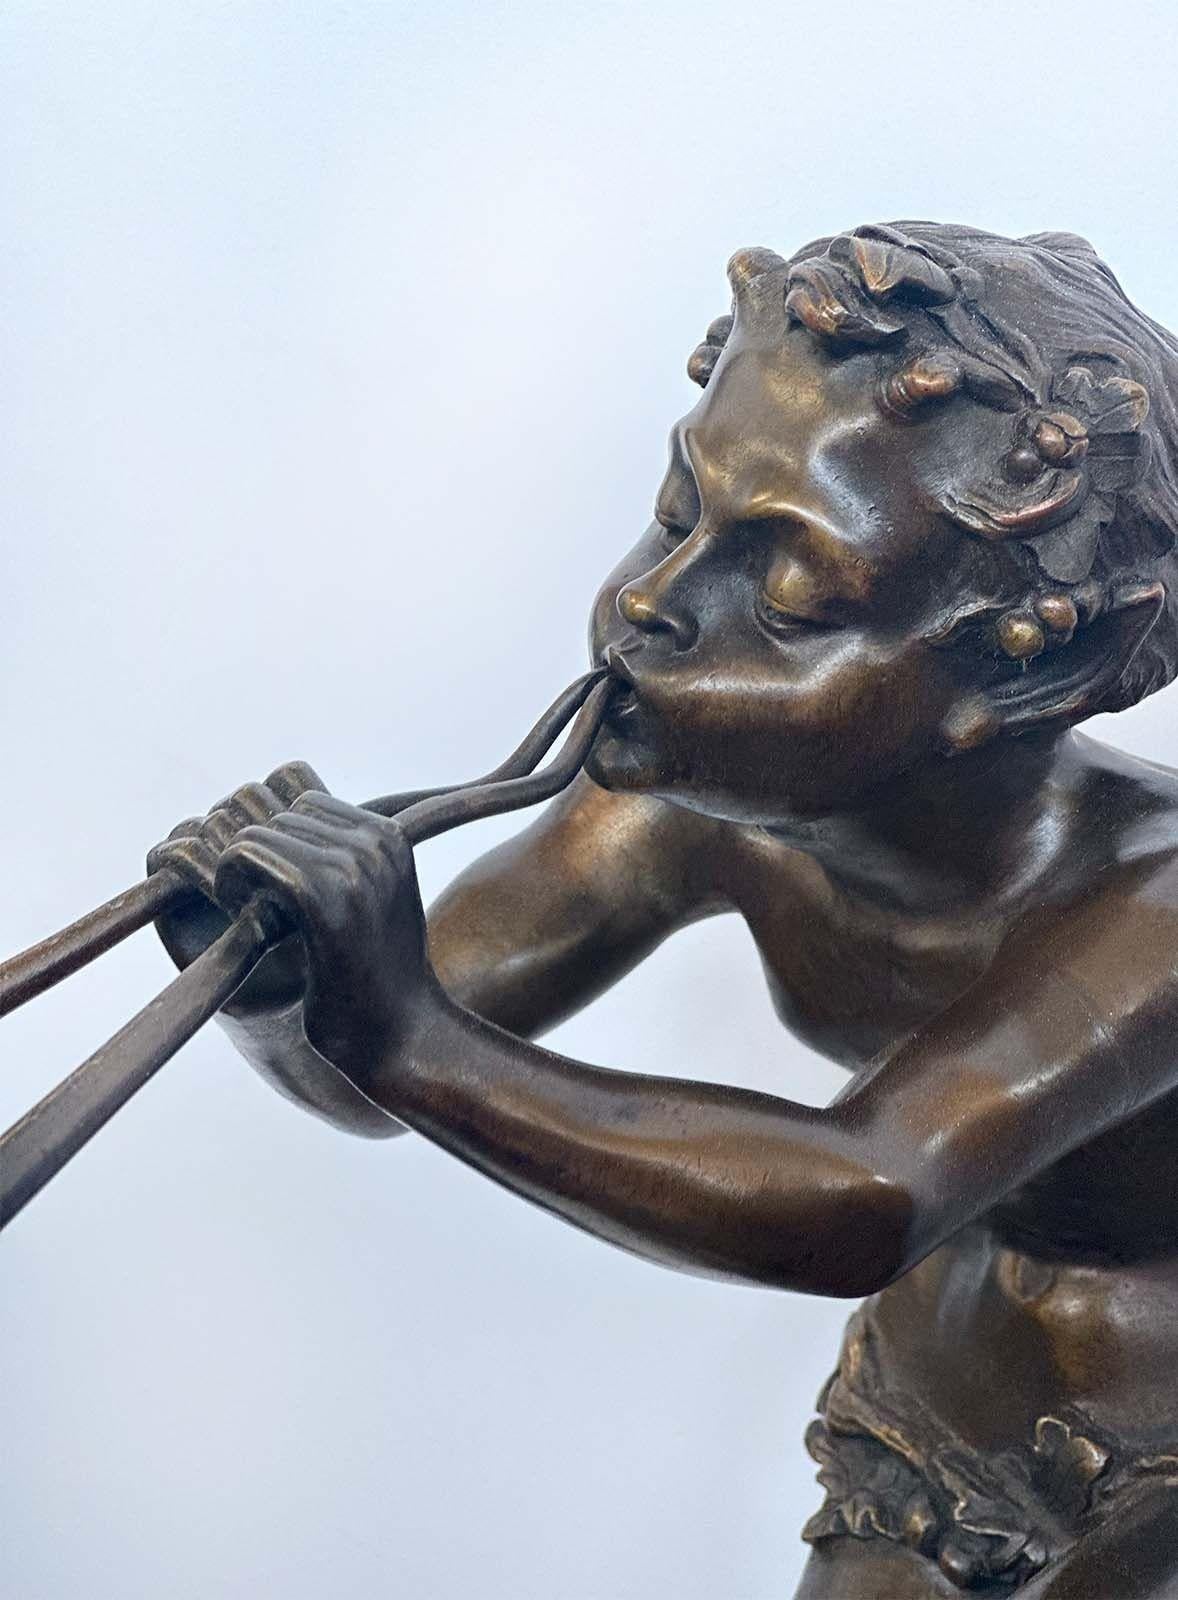 Mesmerizing bronze sculpture from the late 19th century of a mythical faun creature playing  a flute by Claude Michel Clodion. This character gracefully rests on an elegant marble plinth, and includes signature by 